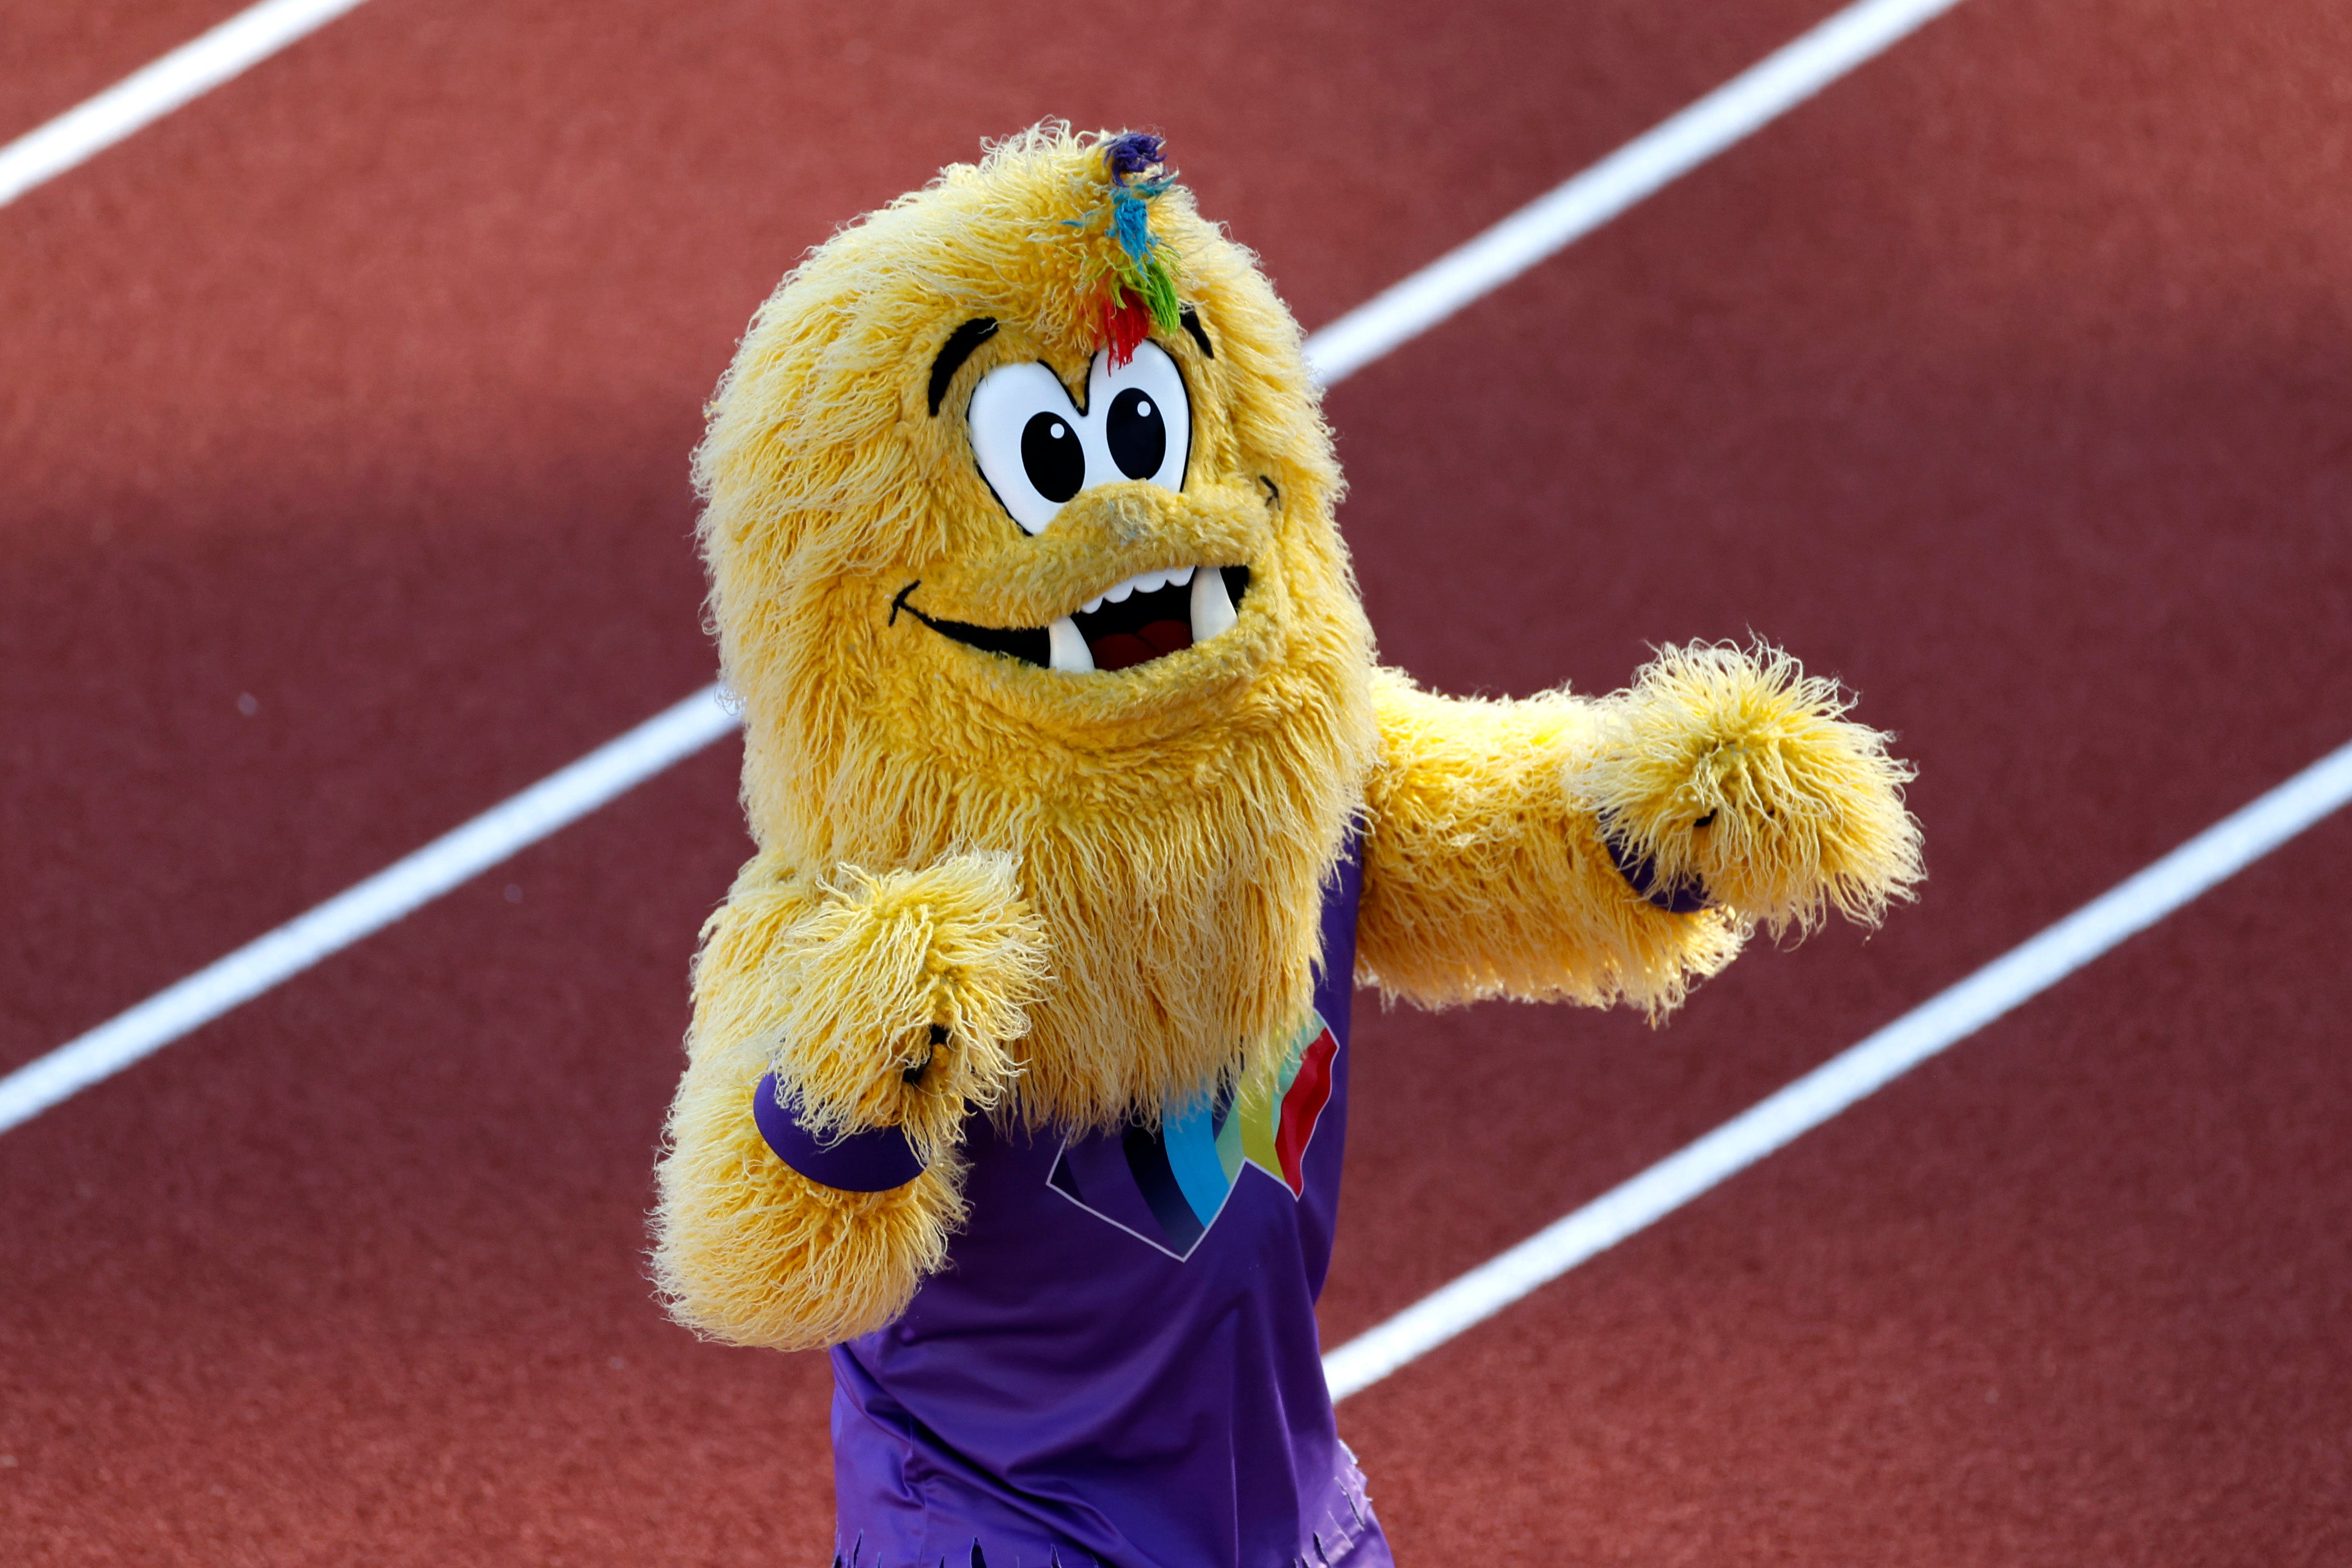 Police were called to Eugene’s Hayward Field after Legend’s yellow head went missing